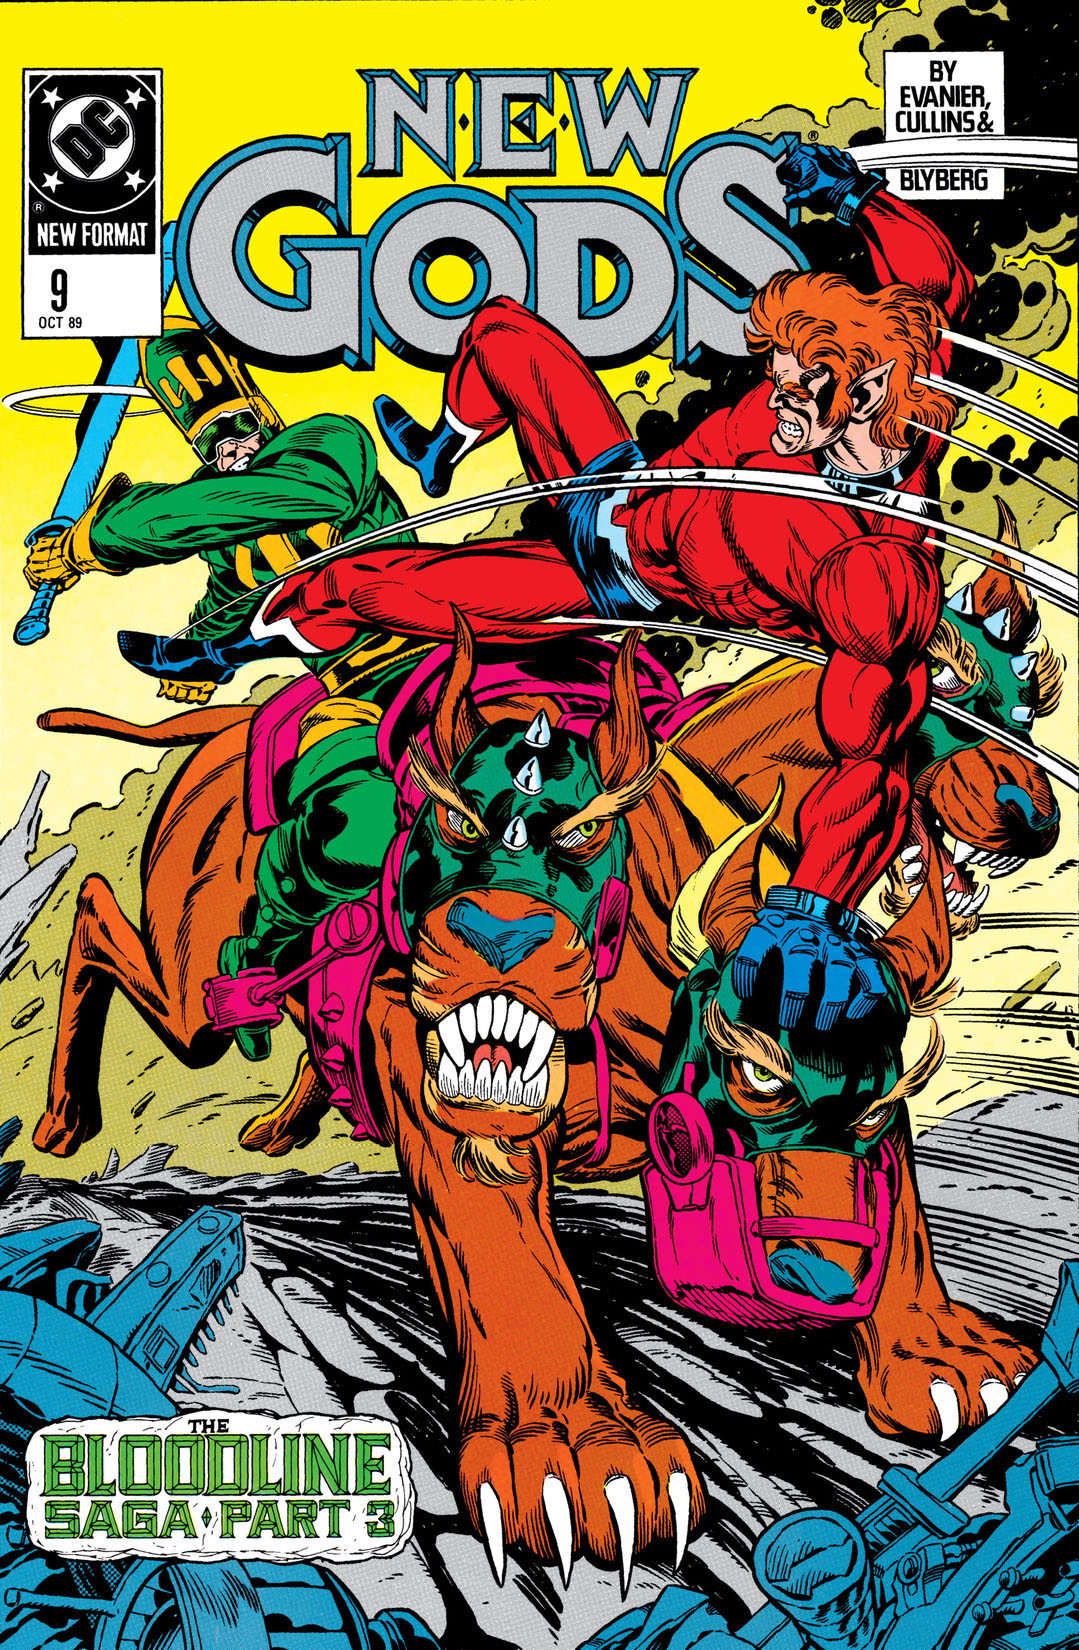 New Gods (1989-) #9 preview images